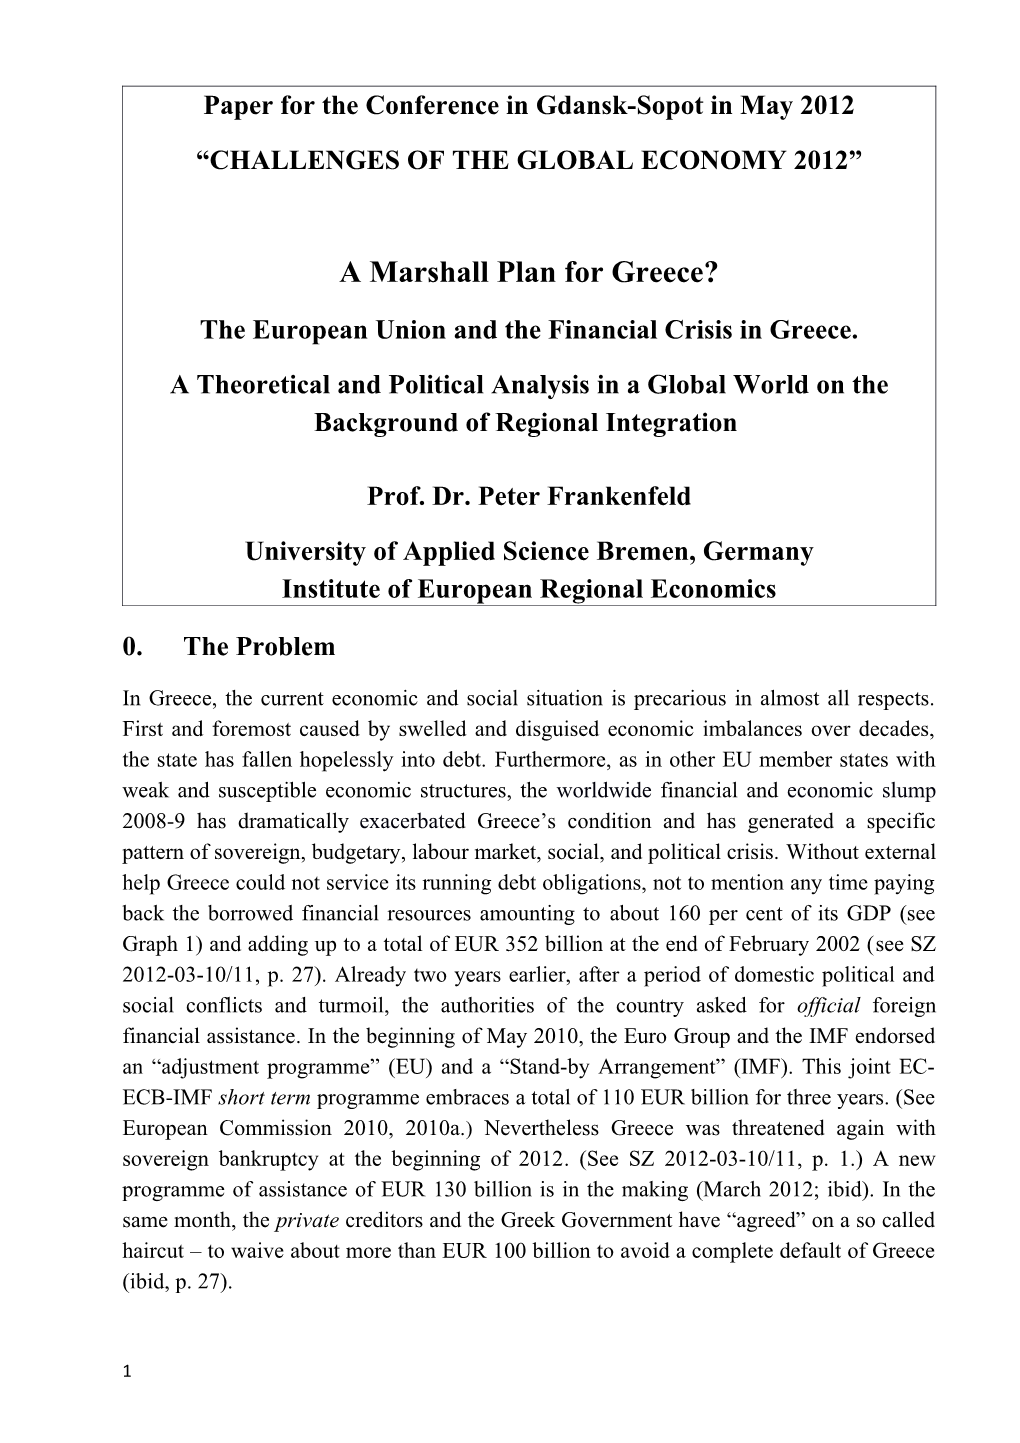 Paper for the Conference in Gdansk-Sopot in May 2012